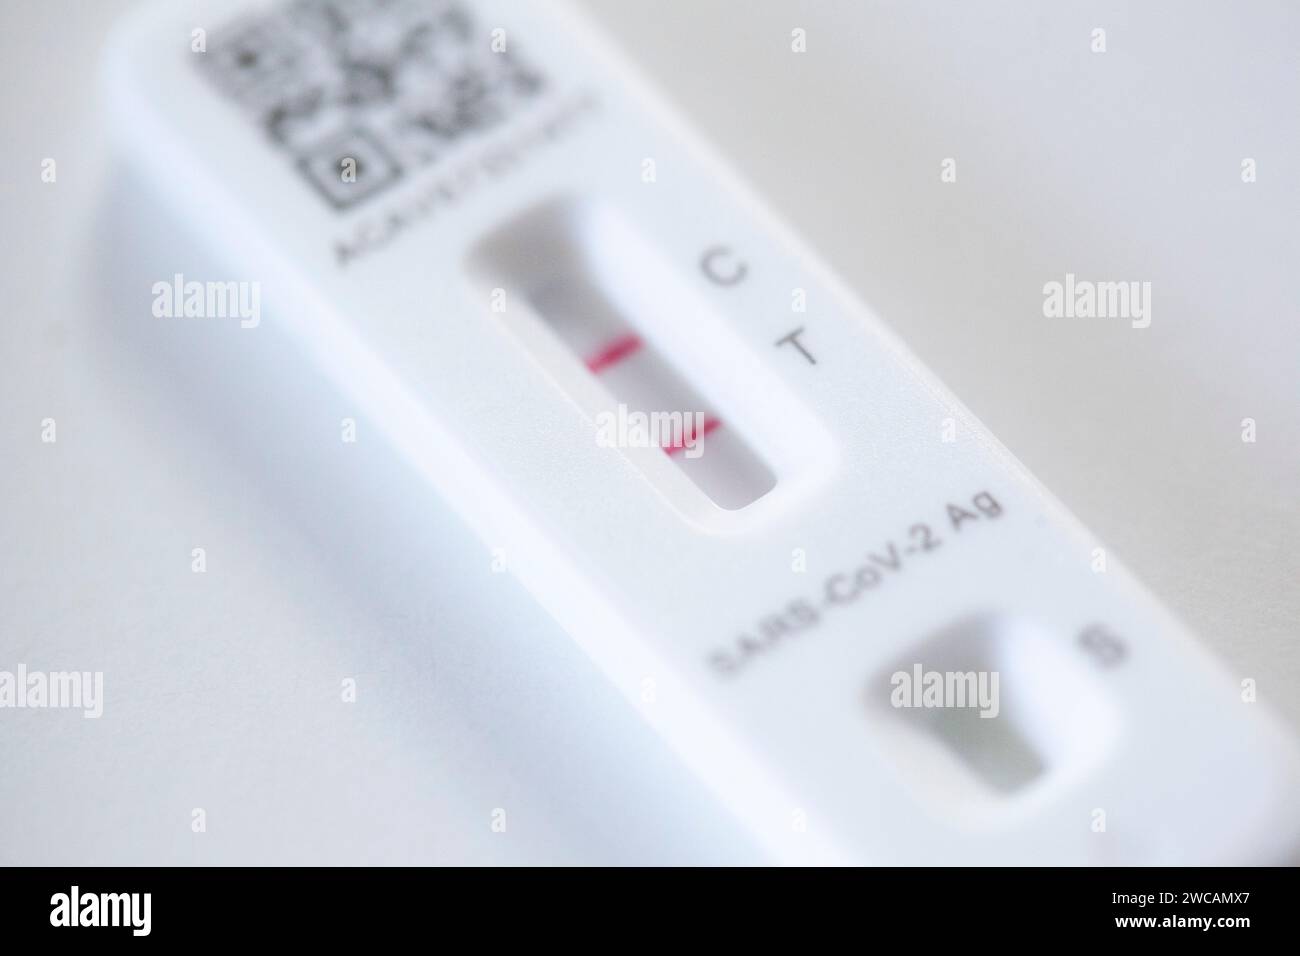 London, UK, 15 January 2024: a lateral flow test with two red lines shows a positive result for Covid. Cases surged in the UK over Christmas and New Year. Around 70% of new cases are of the highly transmissible Juno variant. Anna Watson/Alamy Live News Stock Photo